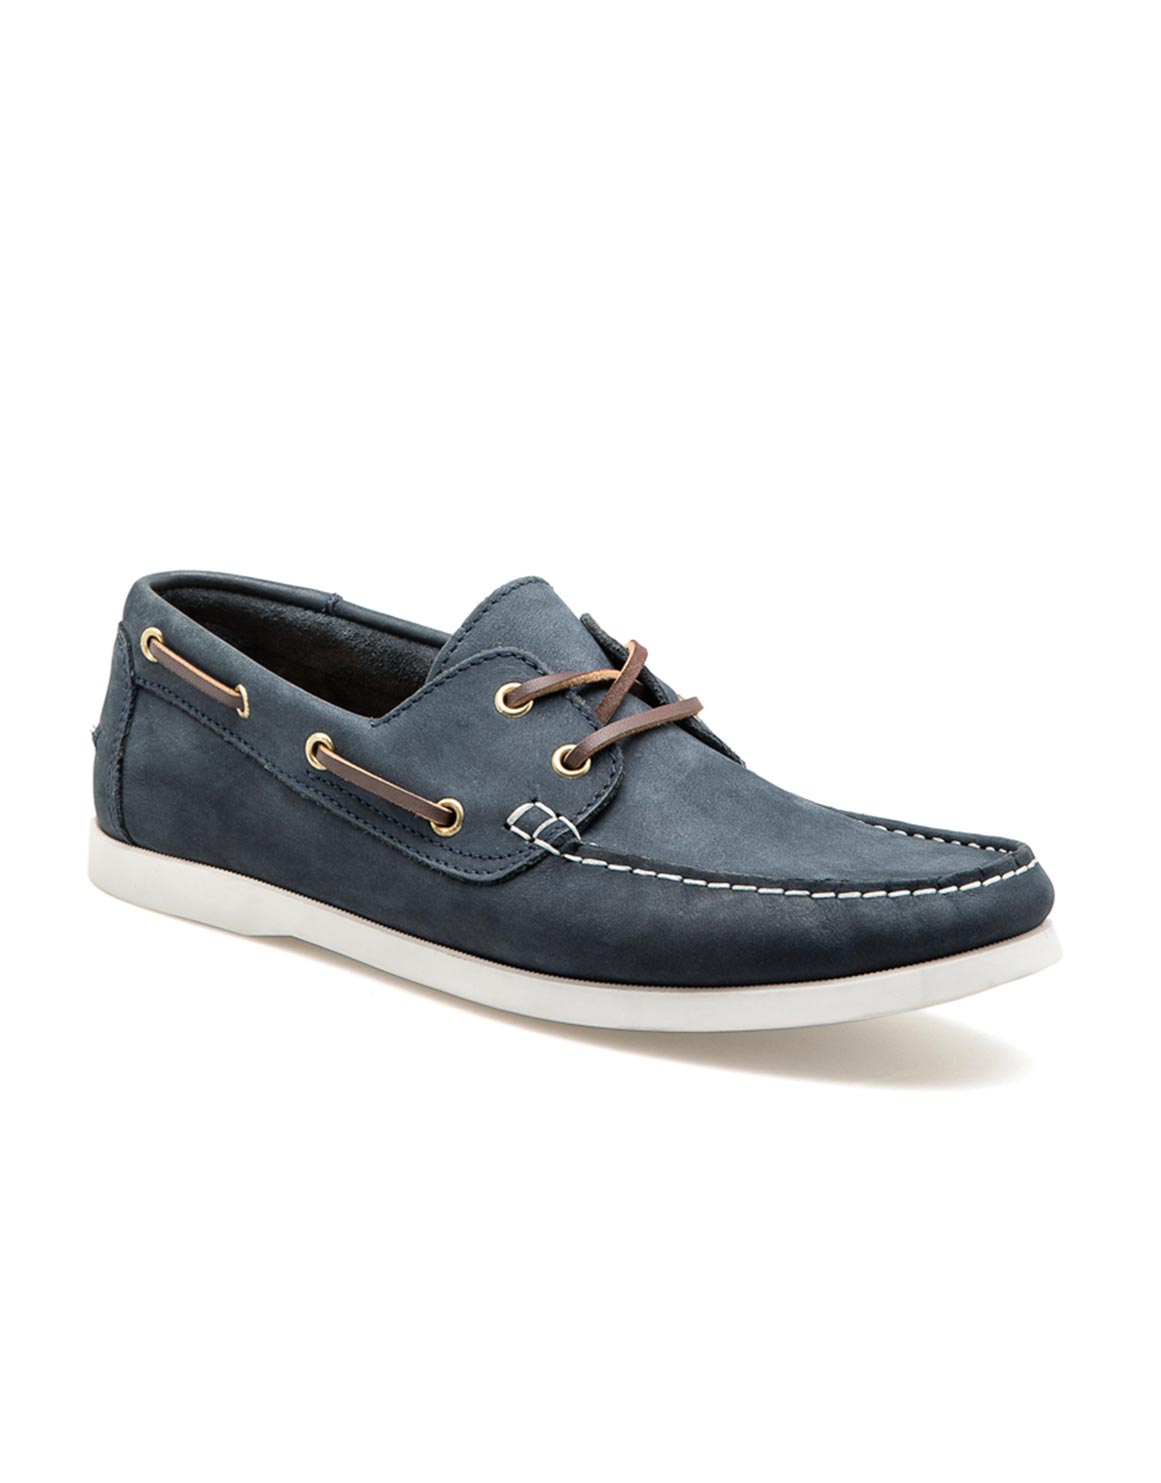 woolworths mens casual shoes,Save up to 18%,www.ilcascinone.com